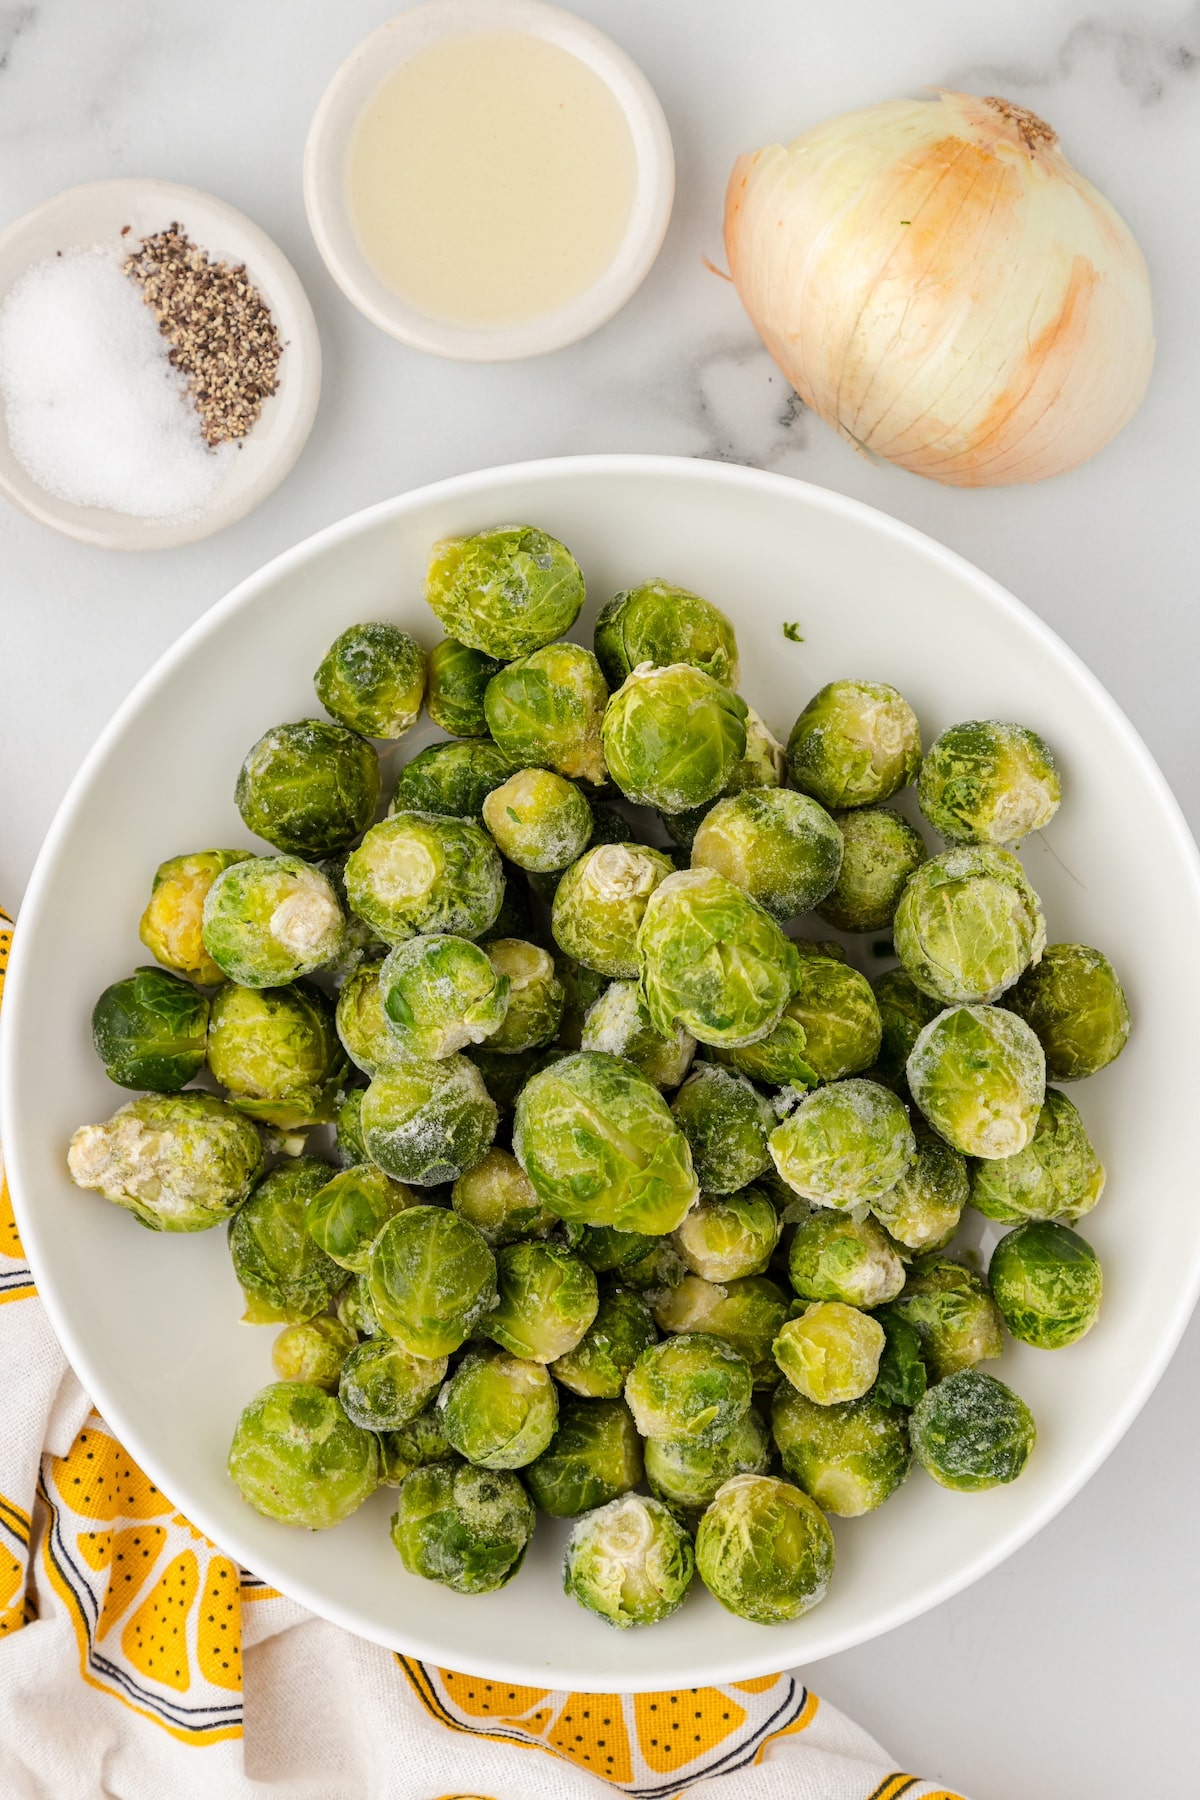 roasted frozen brussels sprouts ingredients including frozen whole brussels sprouts